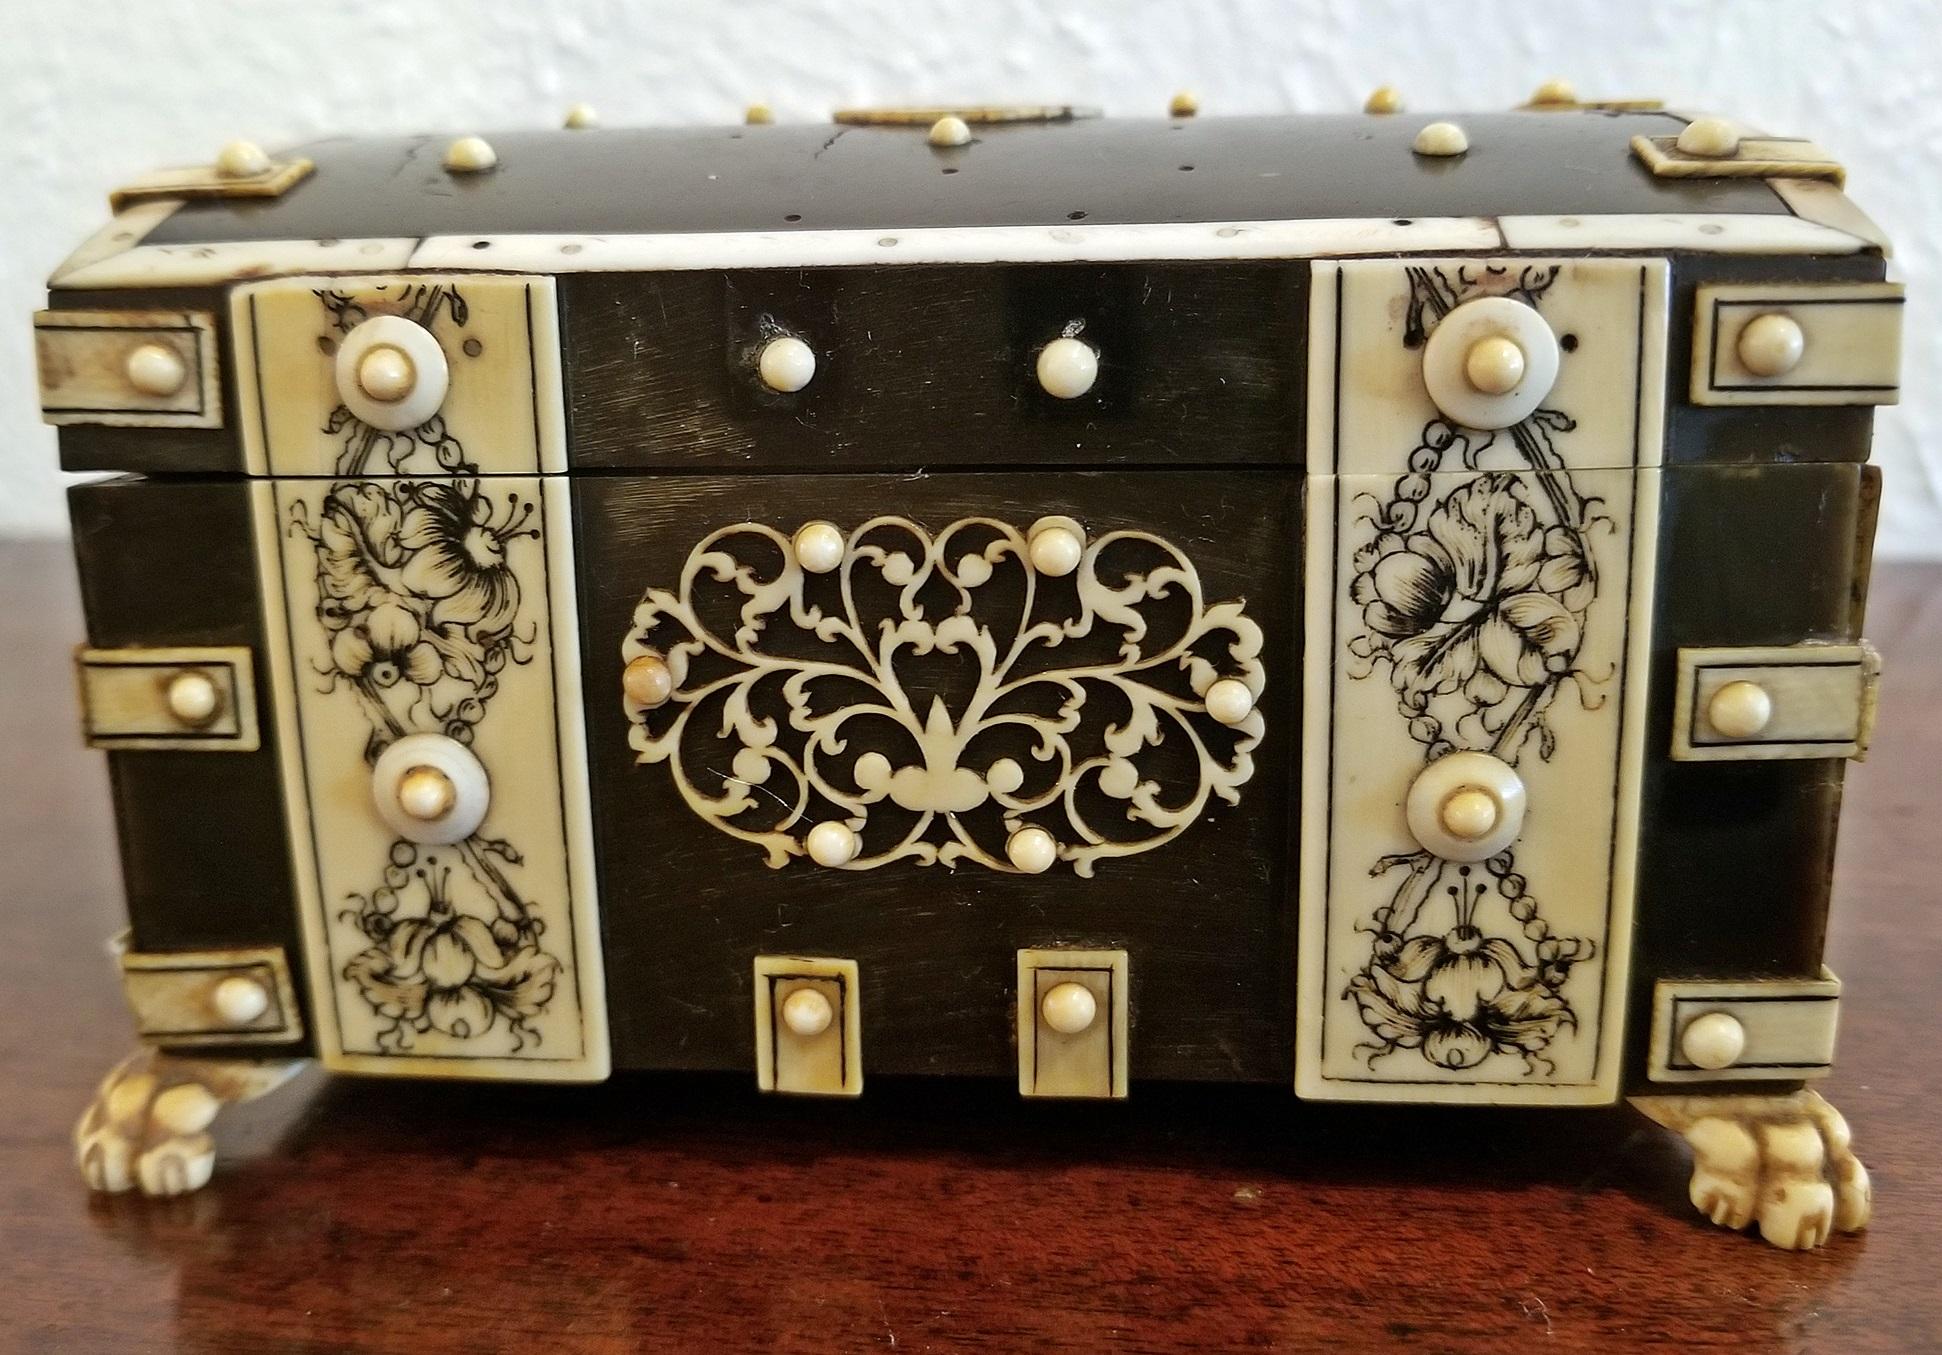 Lovely little box of incredible quality.

Box made in Vizigapatam, India circa 1780.

Made of ebonized sandalwood and bone inlay and edging decorated with lac ink on lions paw feet.

Made to display a ladies pocket watch beautiful and